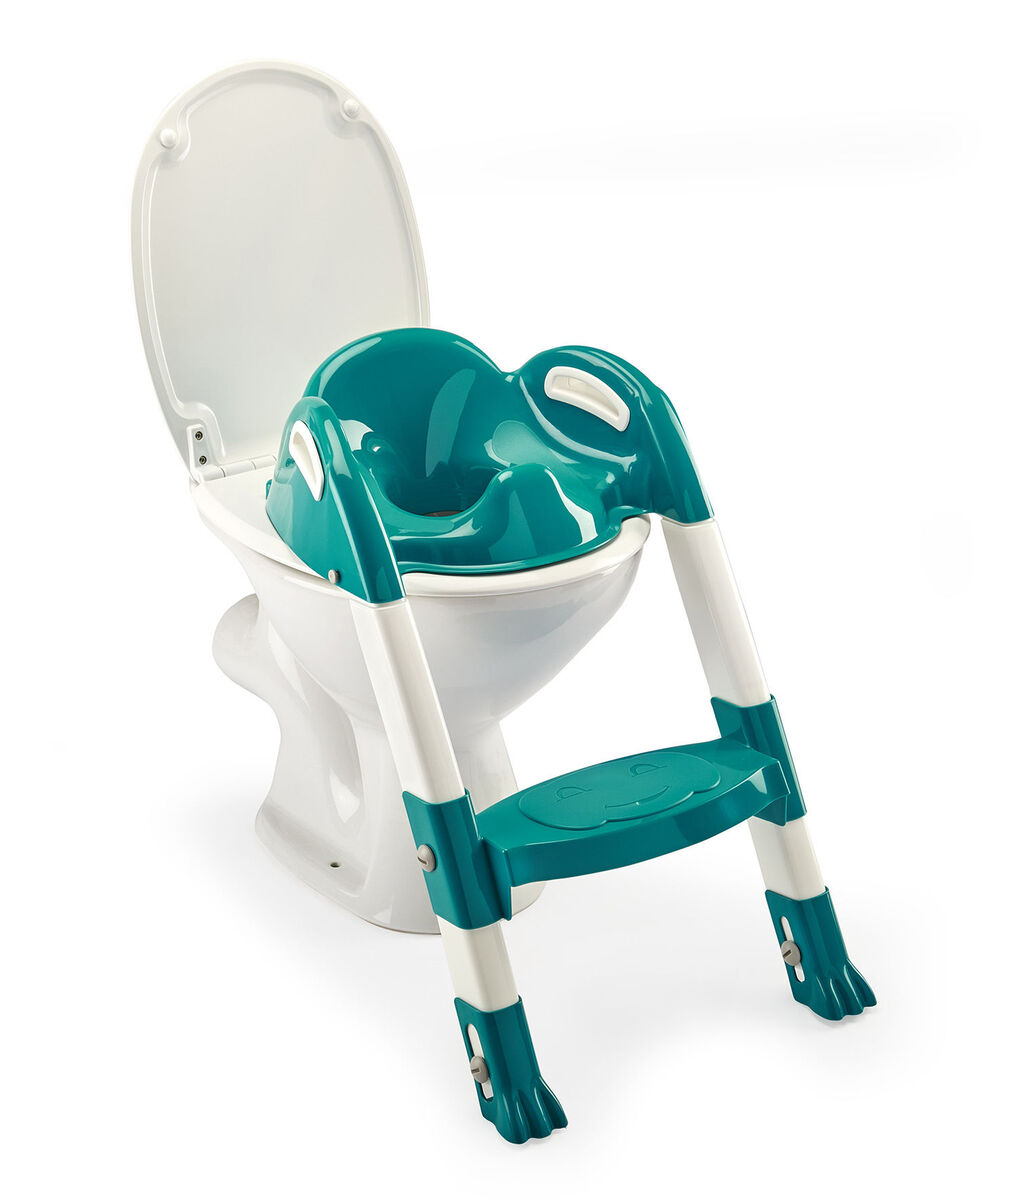 Thermobaby Kiddyloo Toalettsete Med Trapp, Deep Peacock